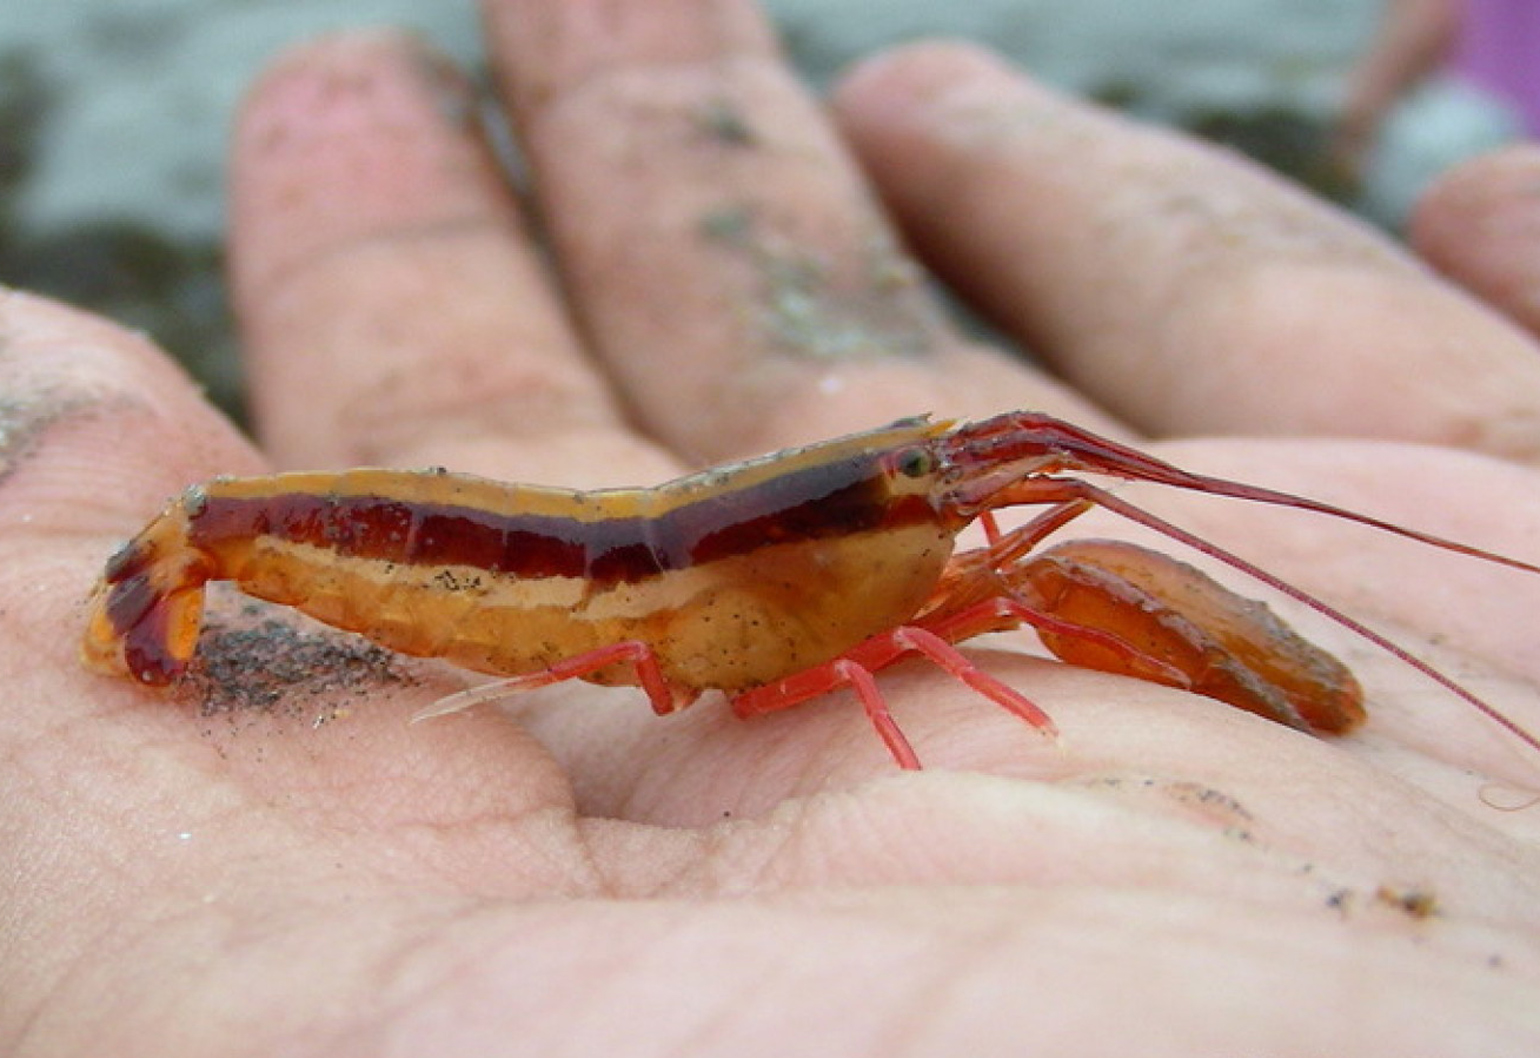 One fusion startup hopes the pistol shrimp can unlock energy's